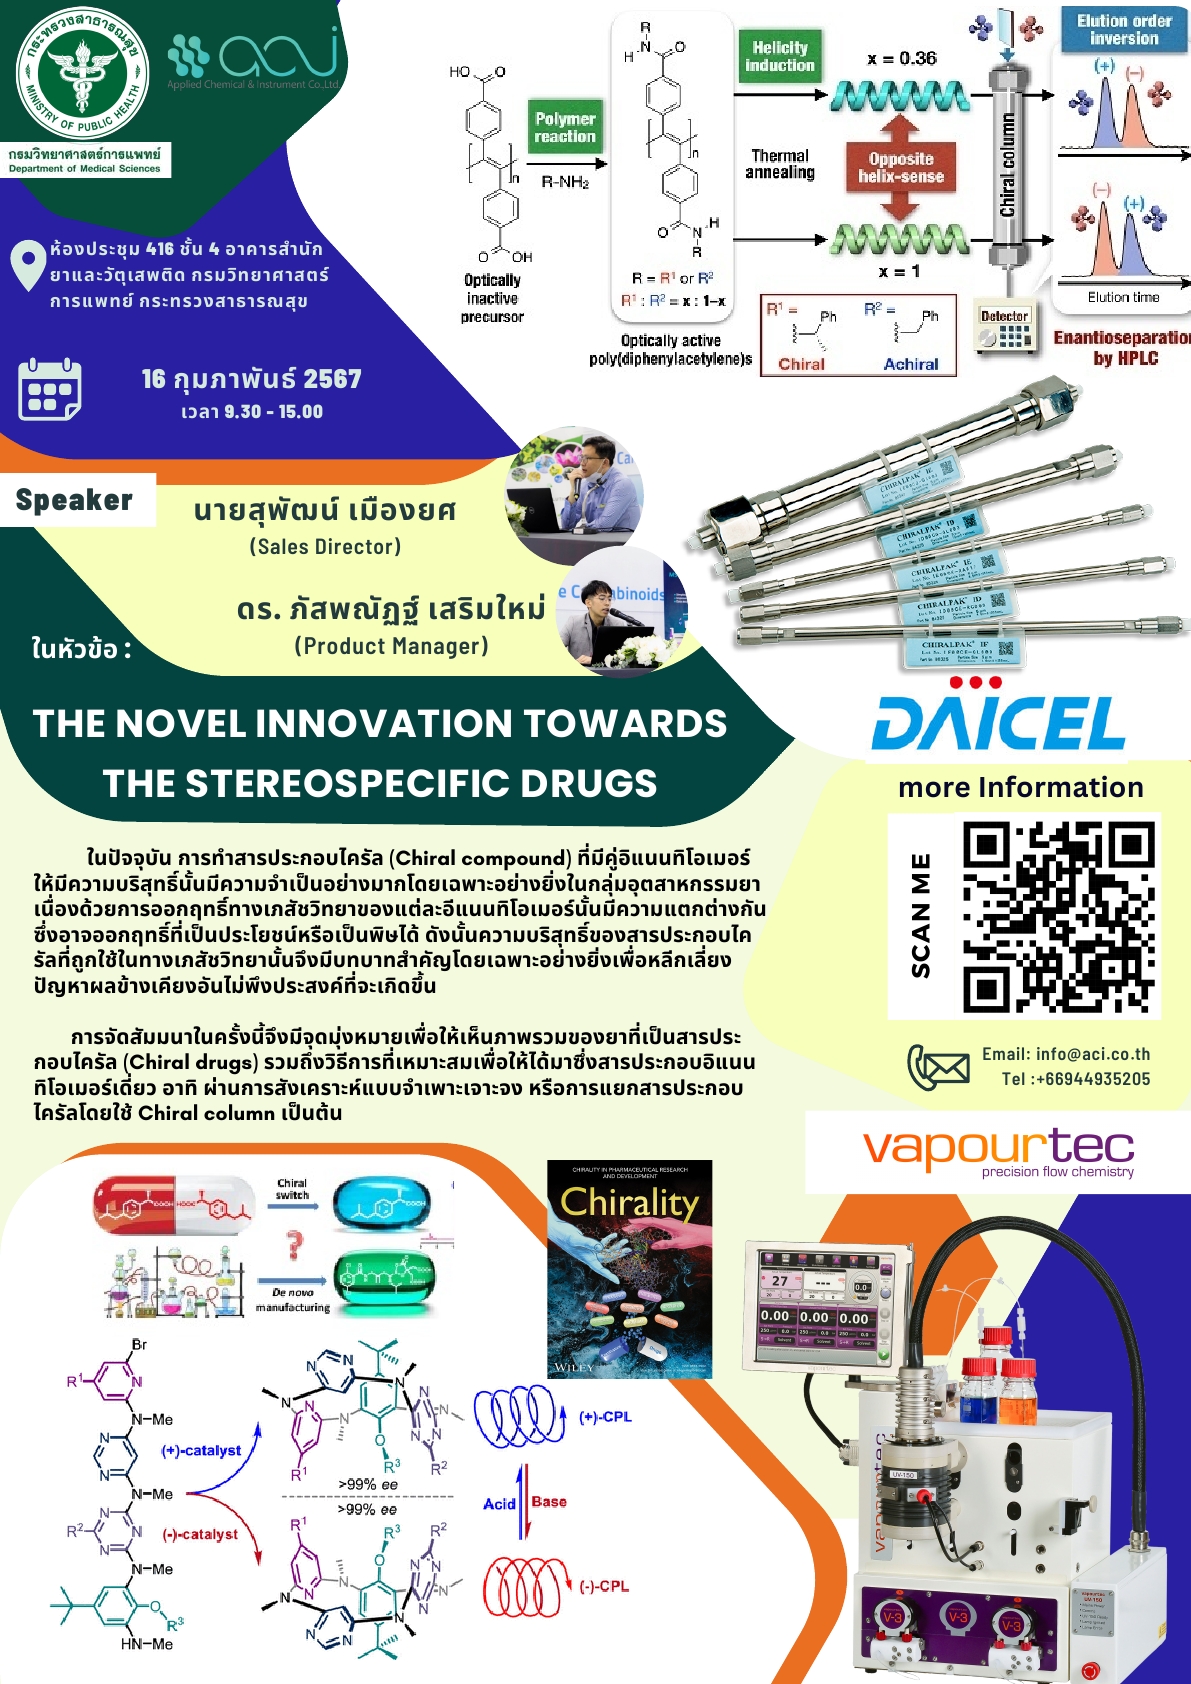 The Novel Innovation towards the Stereospecific Drugs.